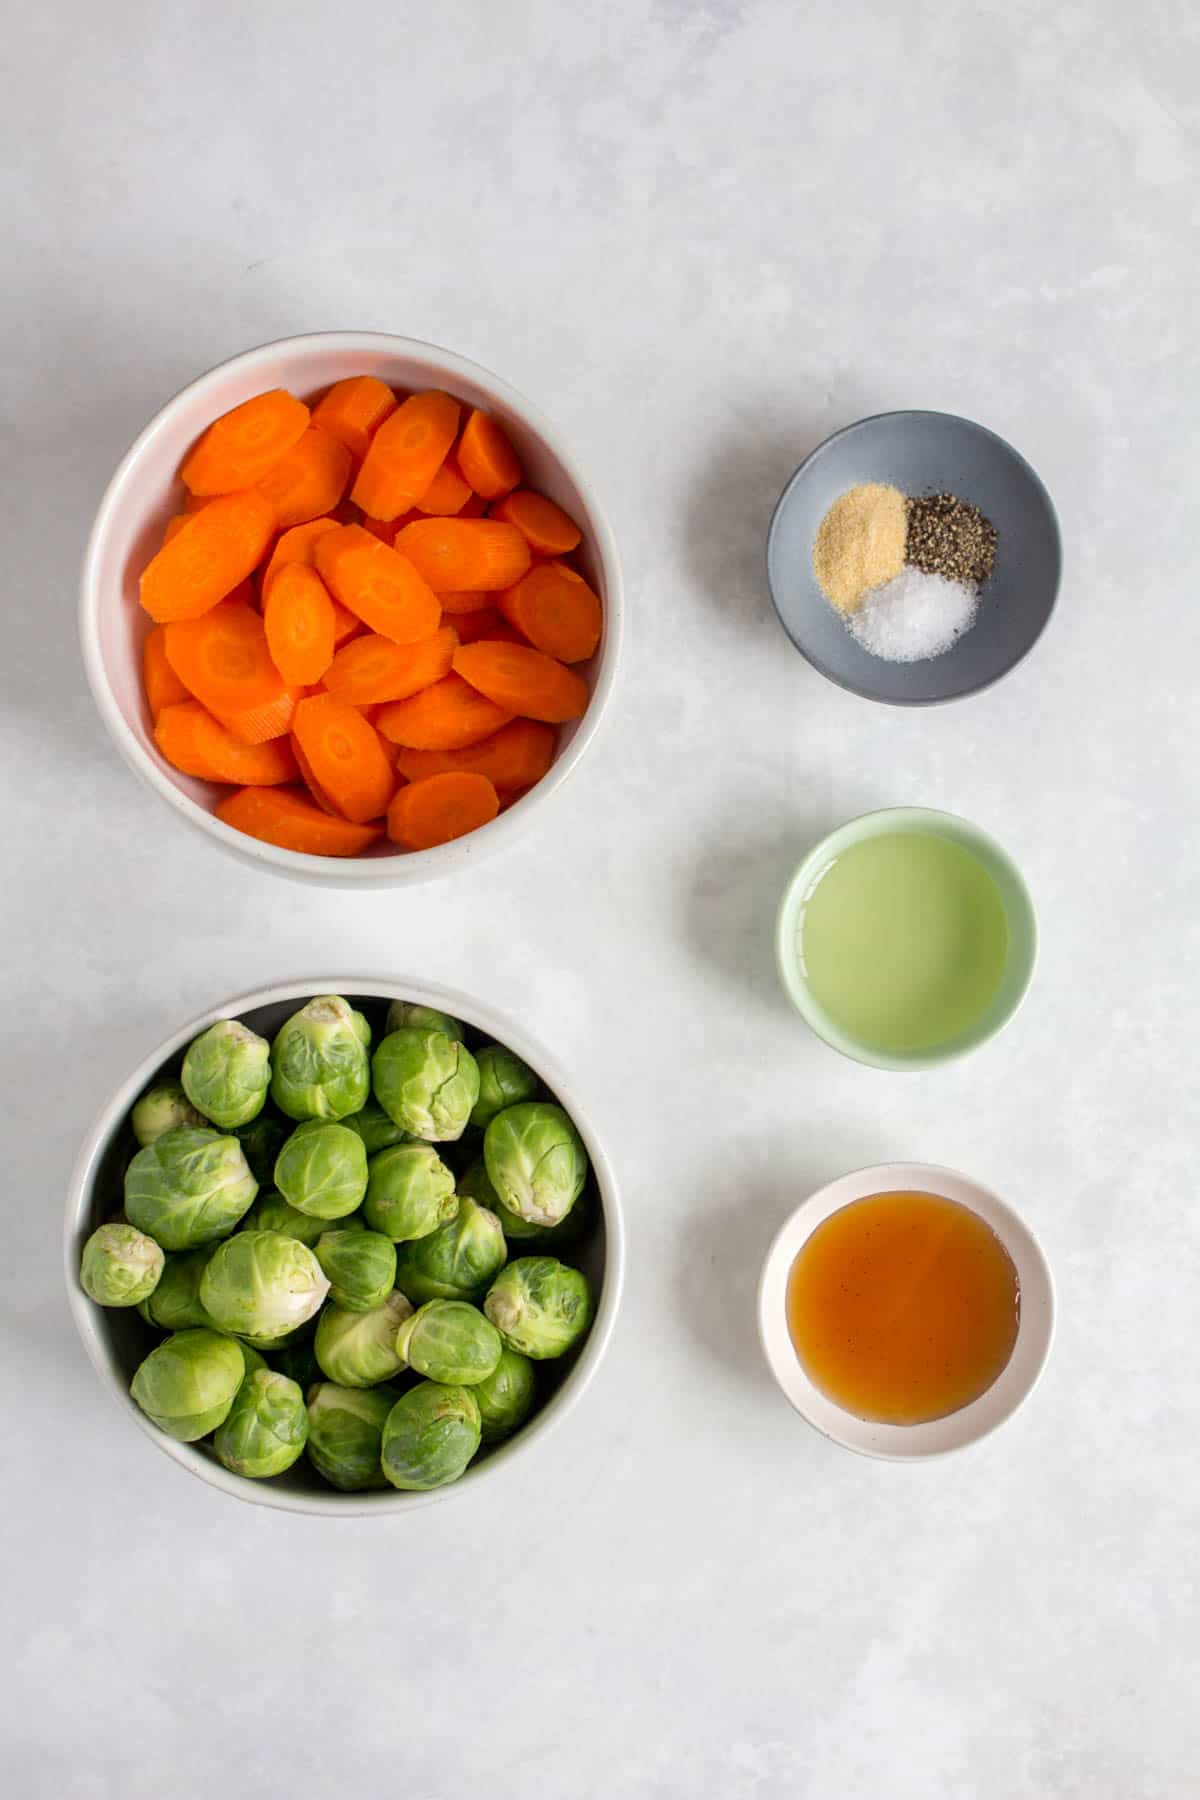 Ingredients needed to make roasted brussels sprouts and carrots.